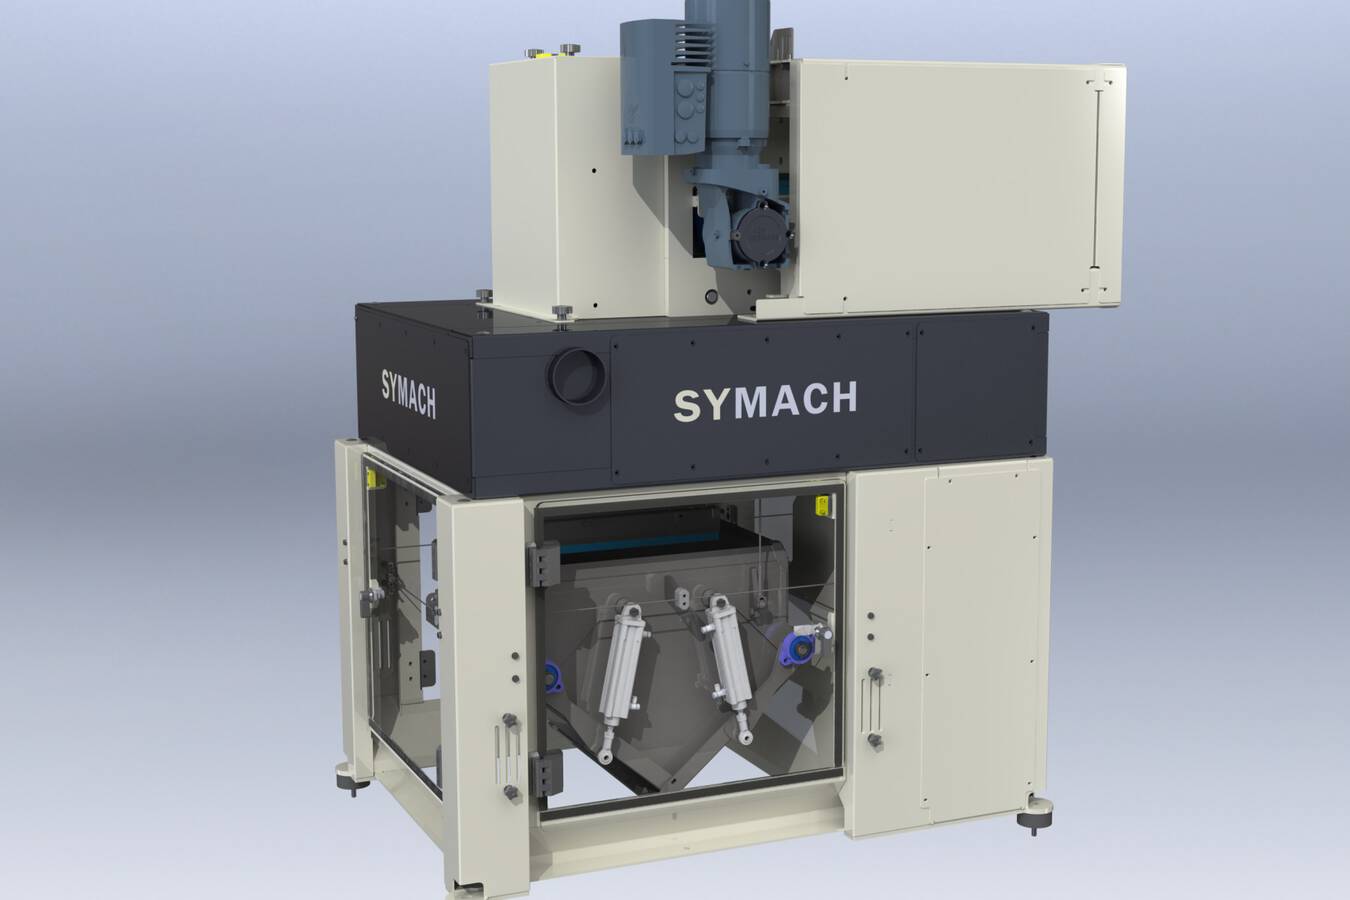 SYMACH designs, manufactures, and integrates weight dosing systems SYMACH designs and manufactures complete bagging lines. Associated with the bagging machine, the weight dosing system is now part of the equipment designed and manufactured by SYMACH.